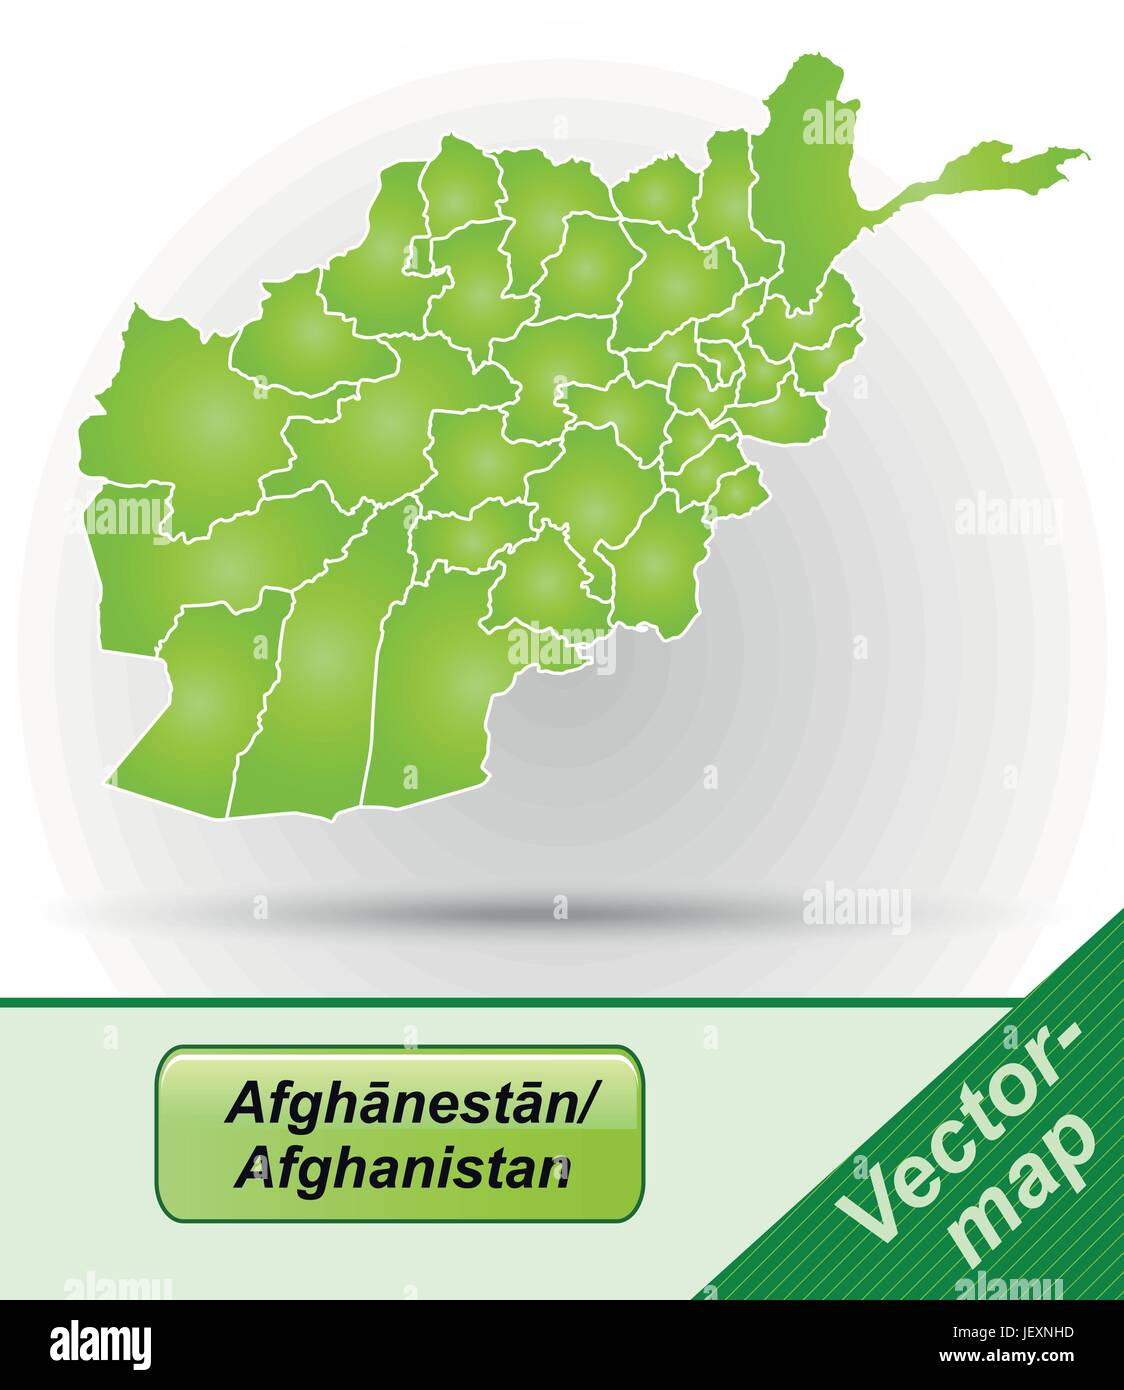 boundary map of afghanistan with borders in green Stock Vector